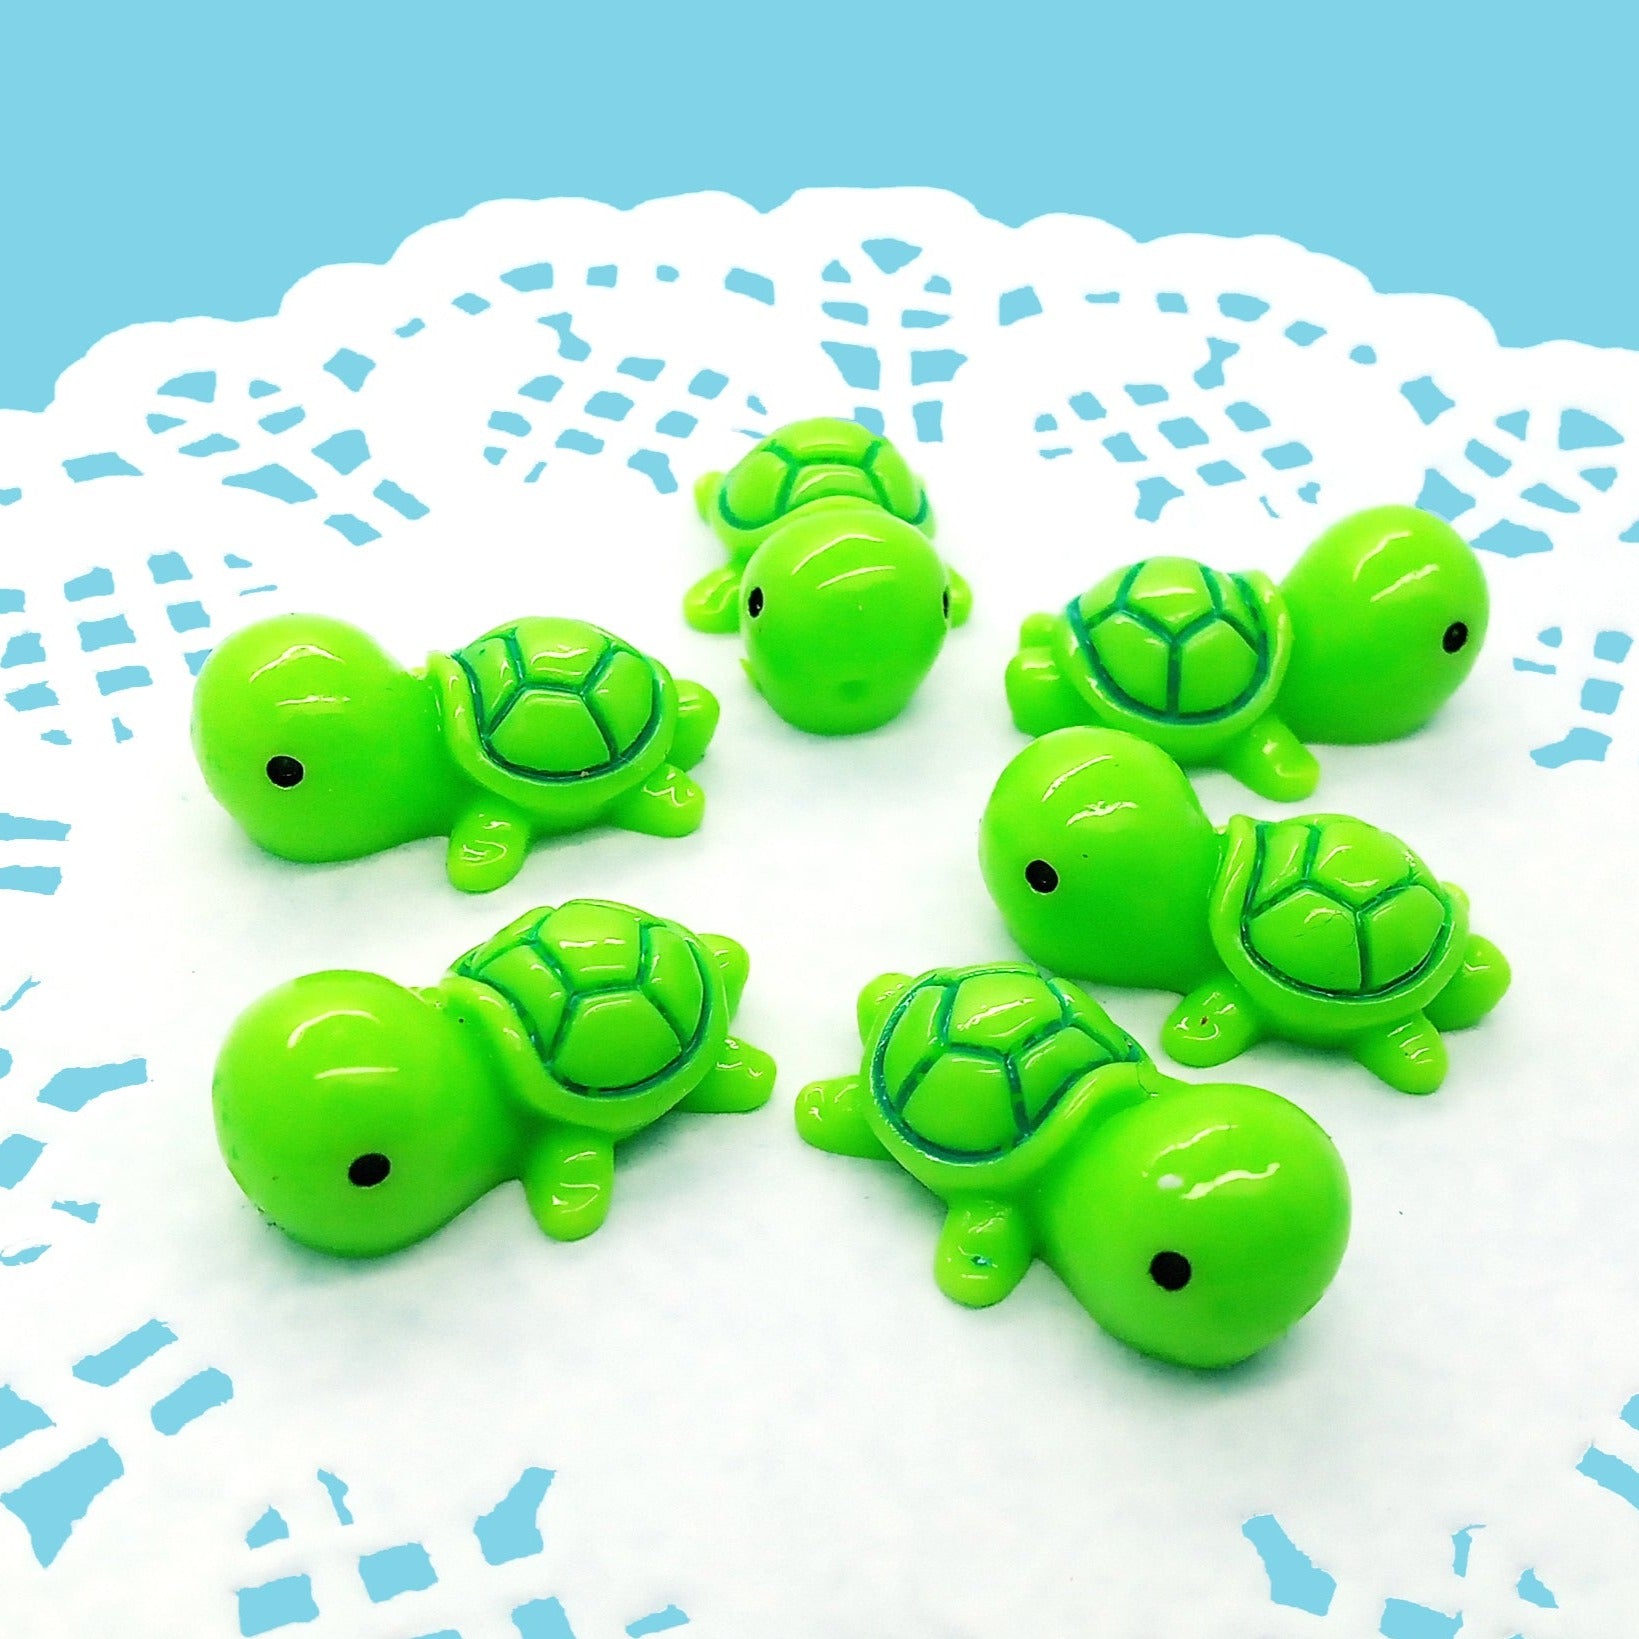 Cute tiny green turtle miniatures made of resin.